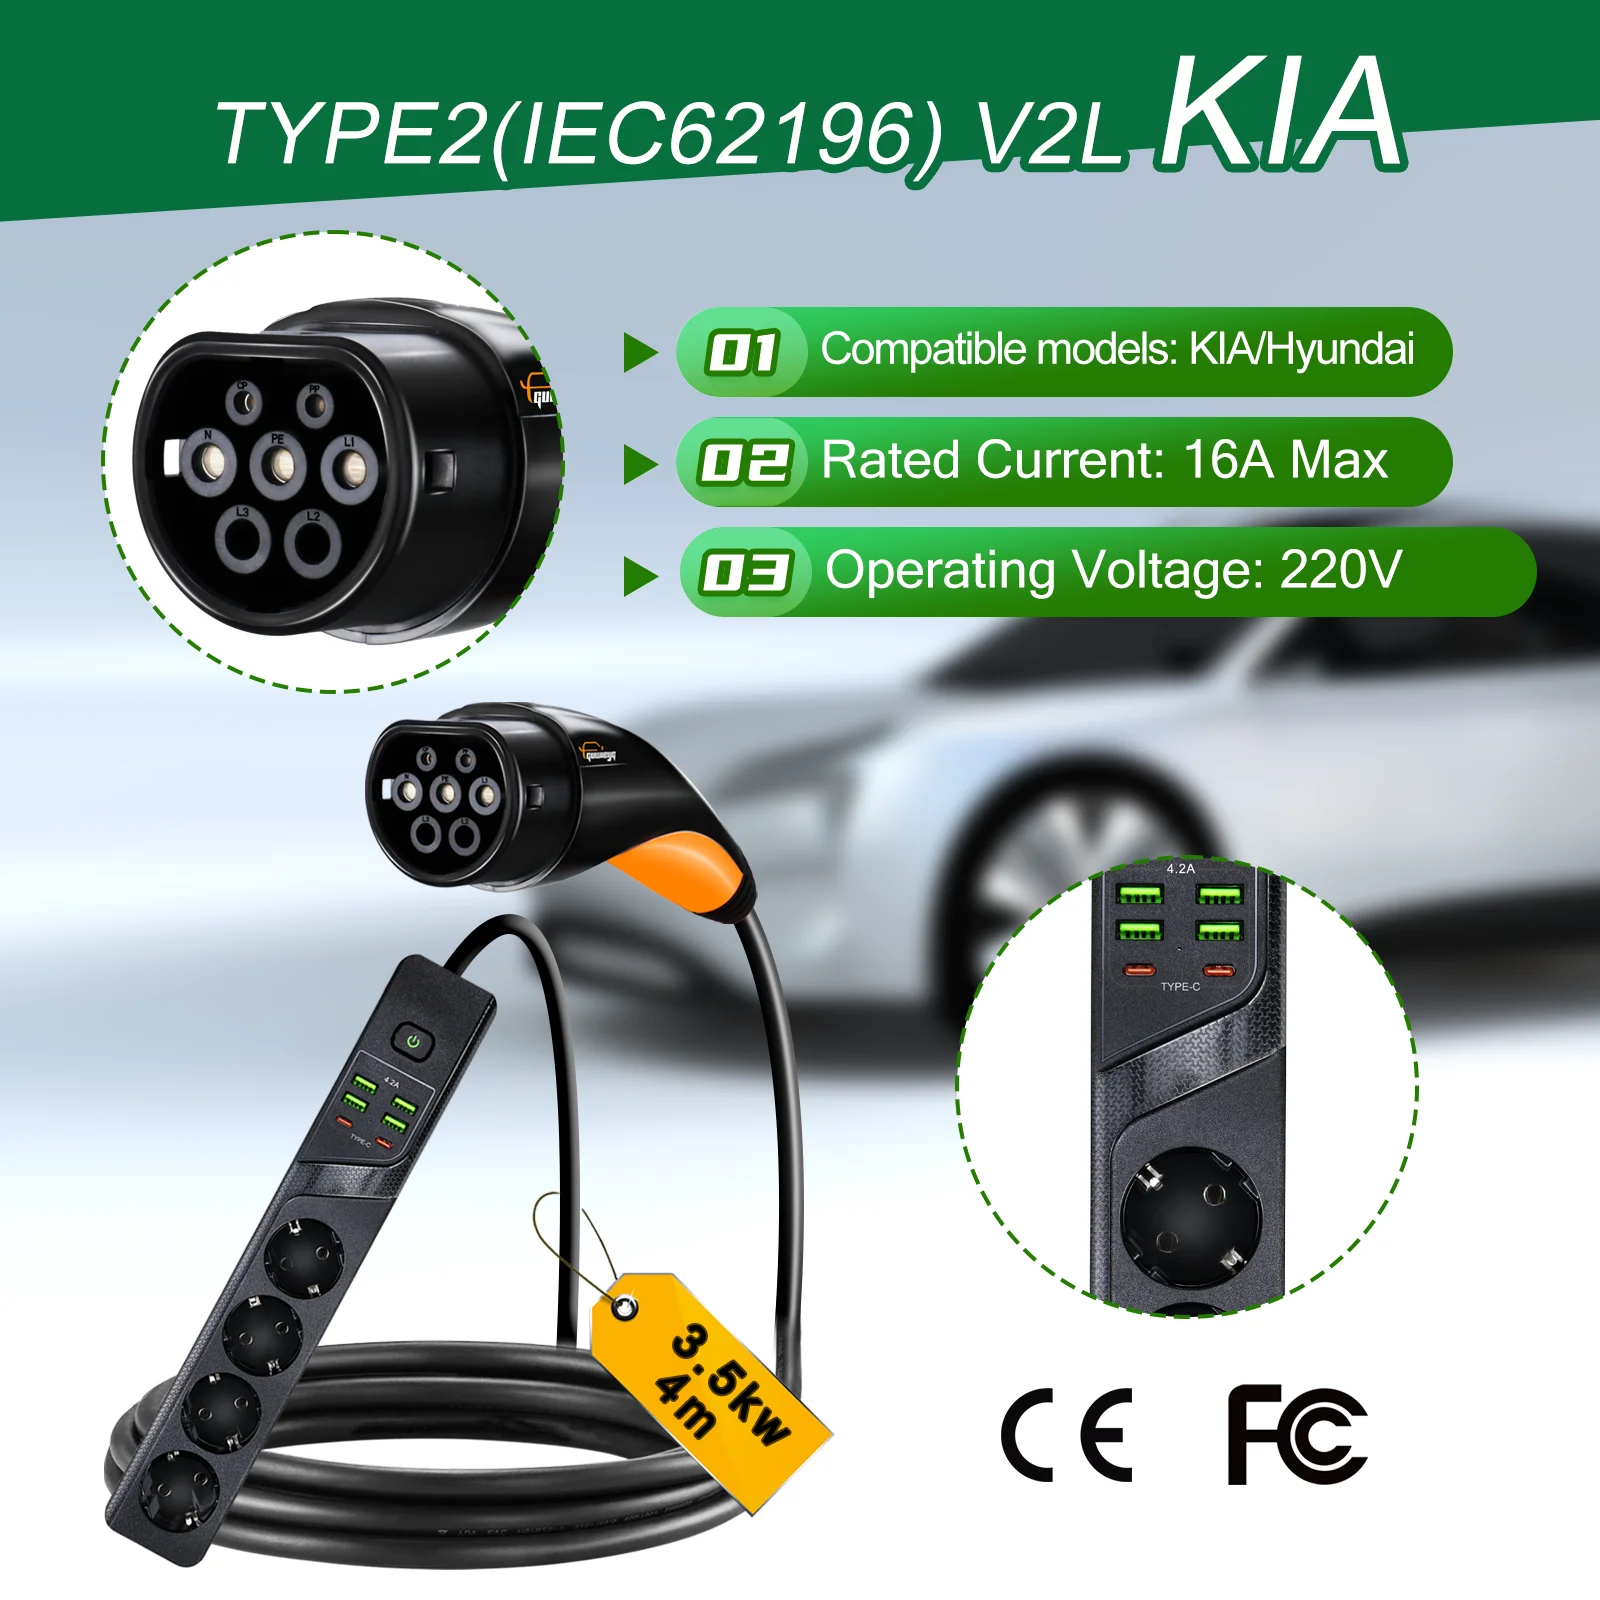 V2L Discharger For Type2 Car Discharge EV Cable Adapter Support MG BYD Kia  Hyundai Discharge V2L Vehicle to Load Type 2 - AliExpress